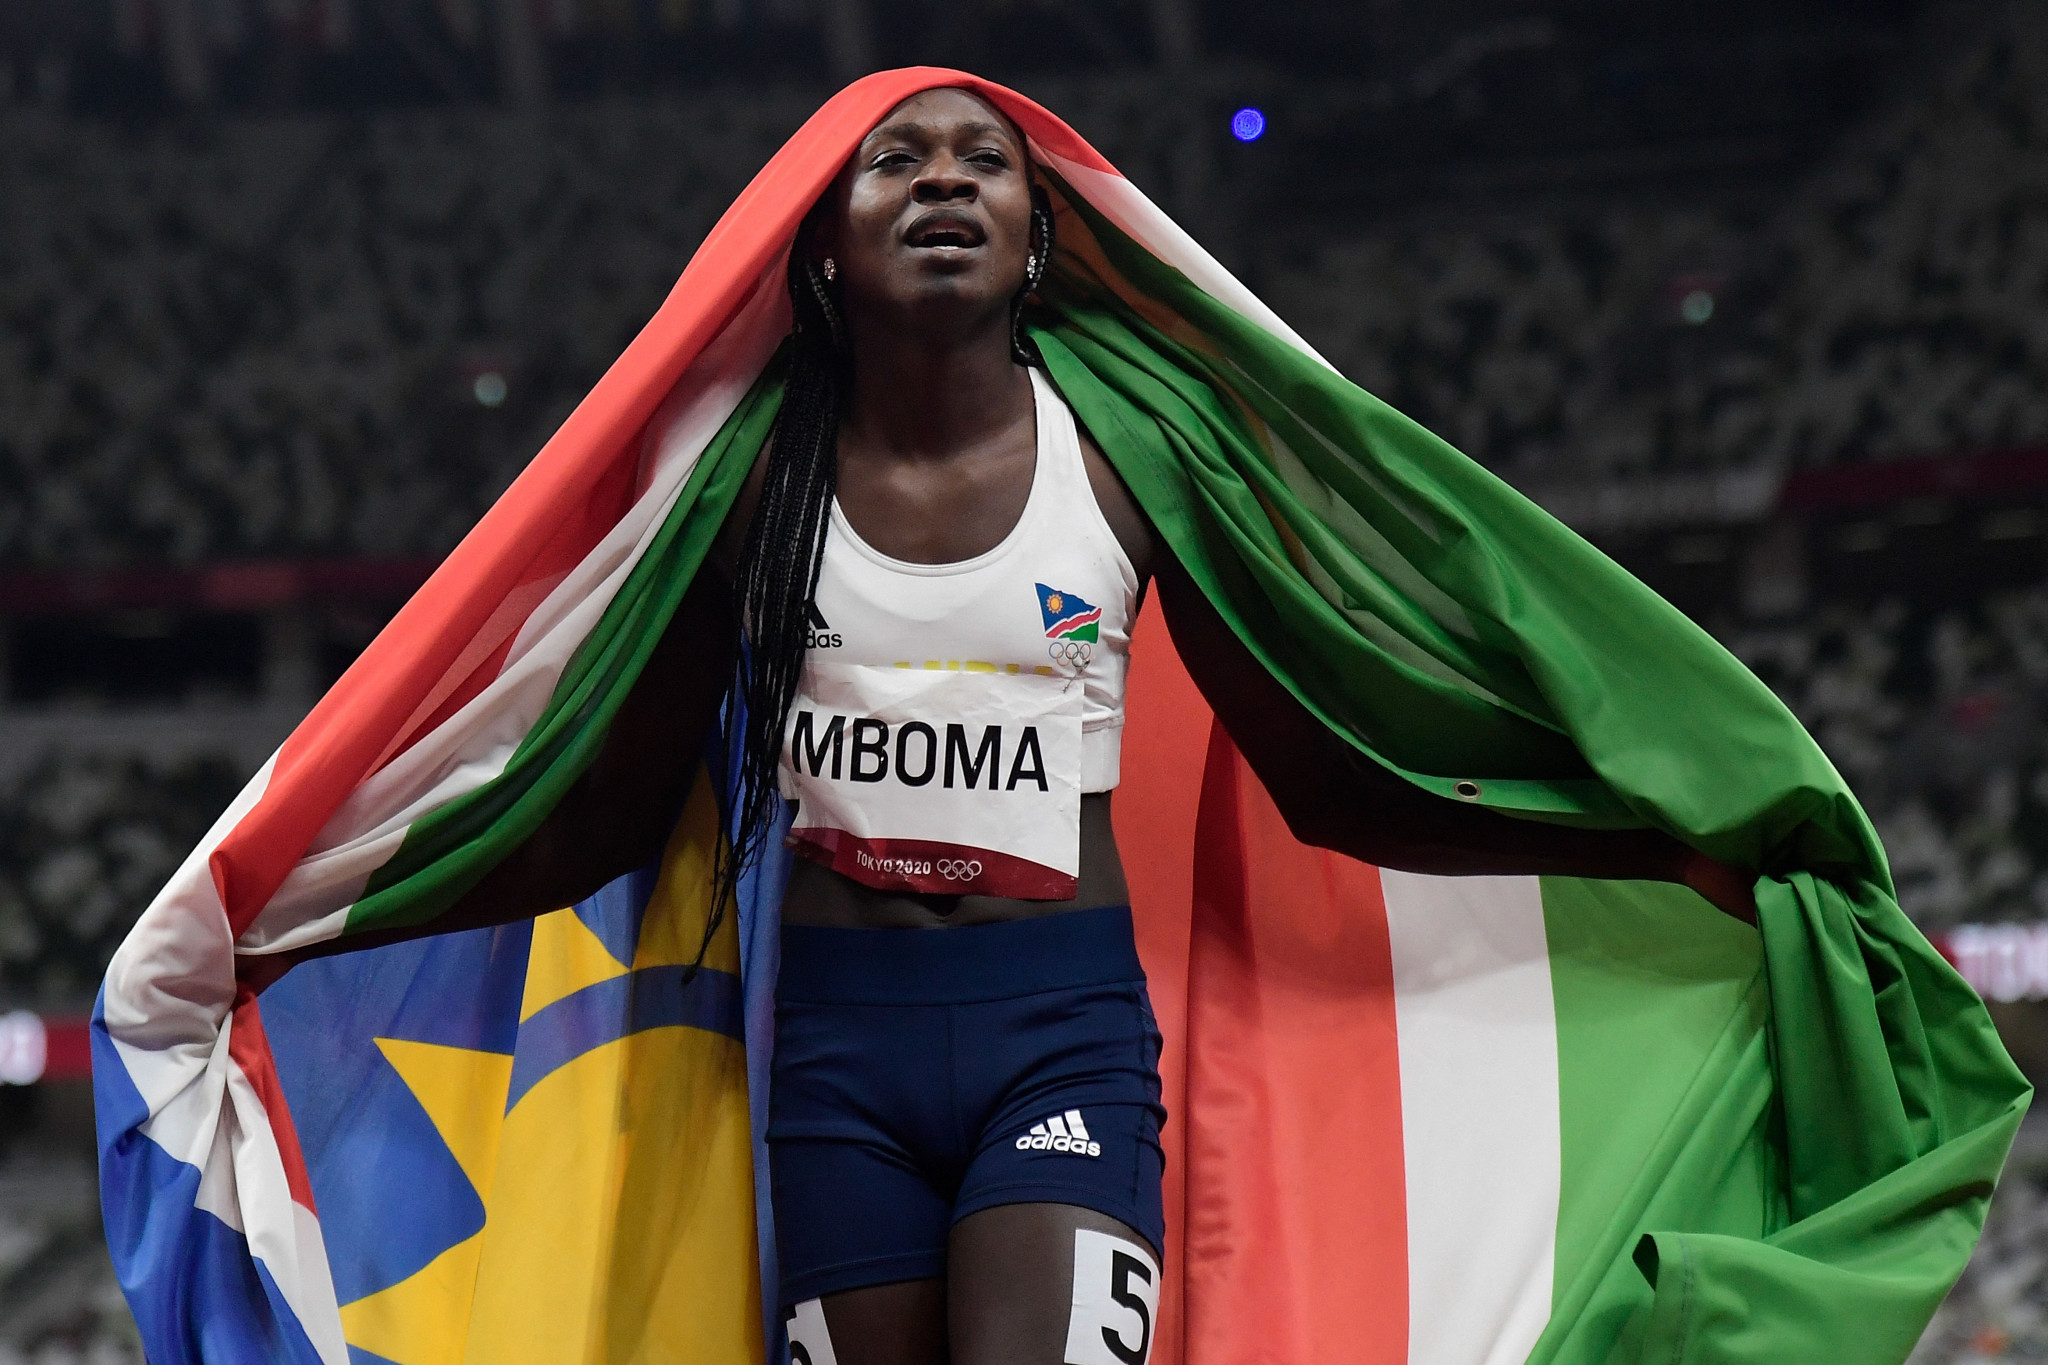 Namibia's DSD athlete Christine Mboma was forced to move from 400m to 200m due to testosterone levels, but still won silver at Tokyo 2020 ©Getty Images